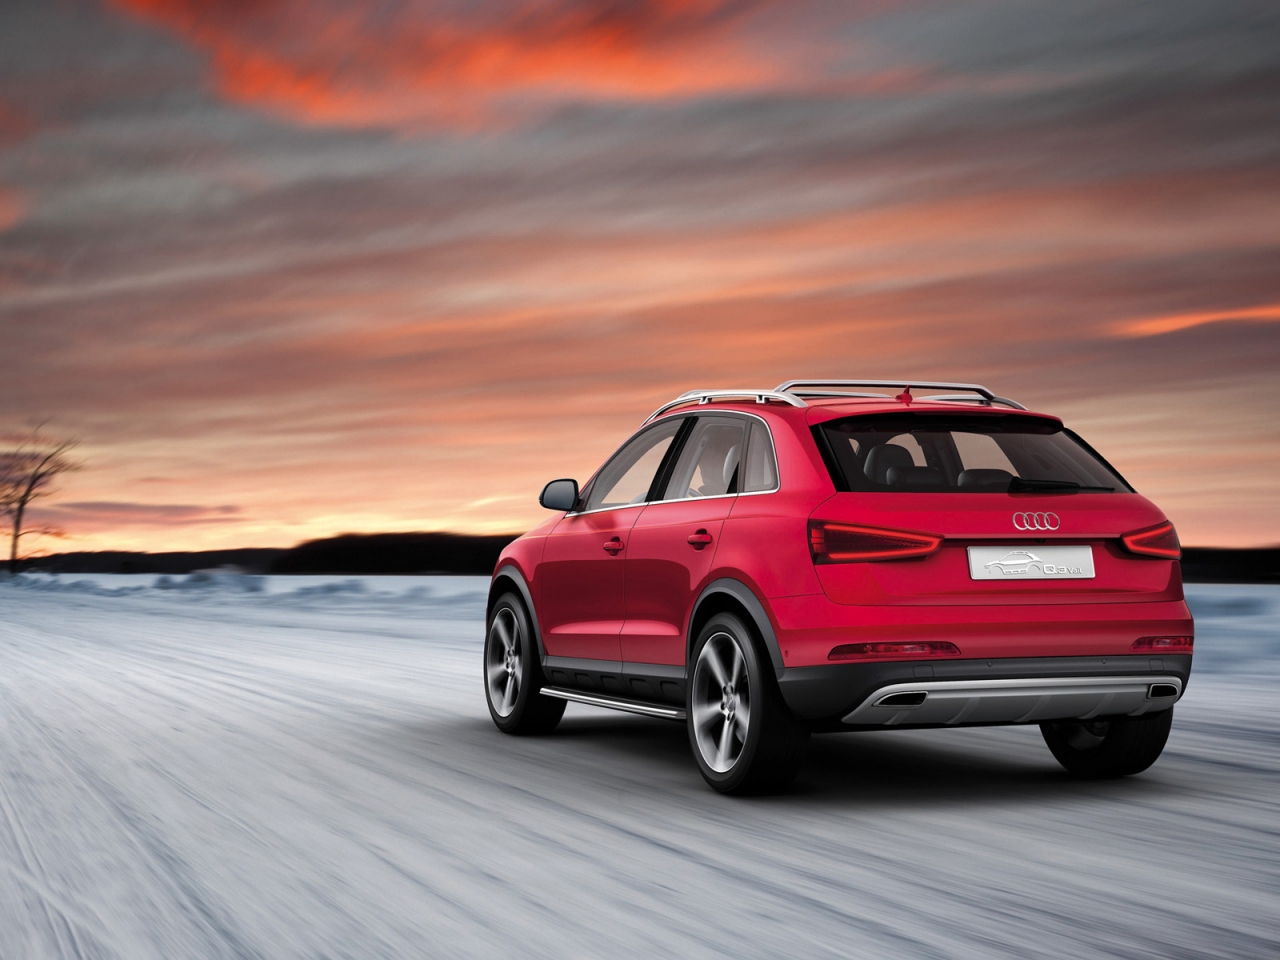 2012 Audi Q3 Vail Rear for 1280 x 960 resolution